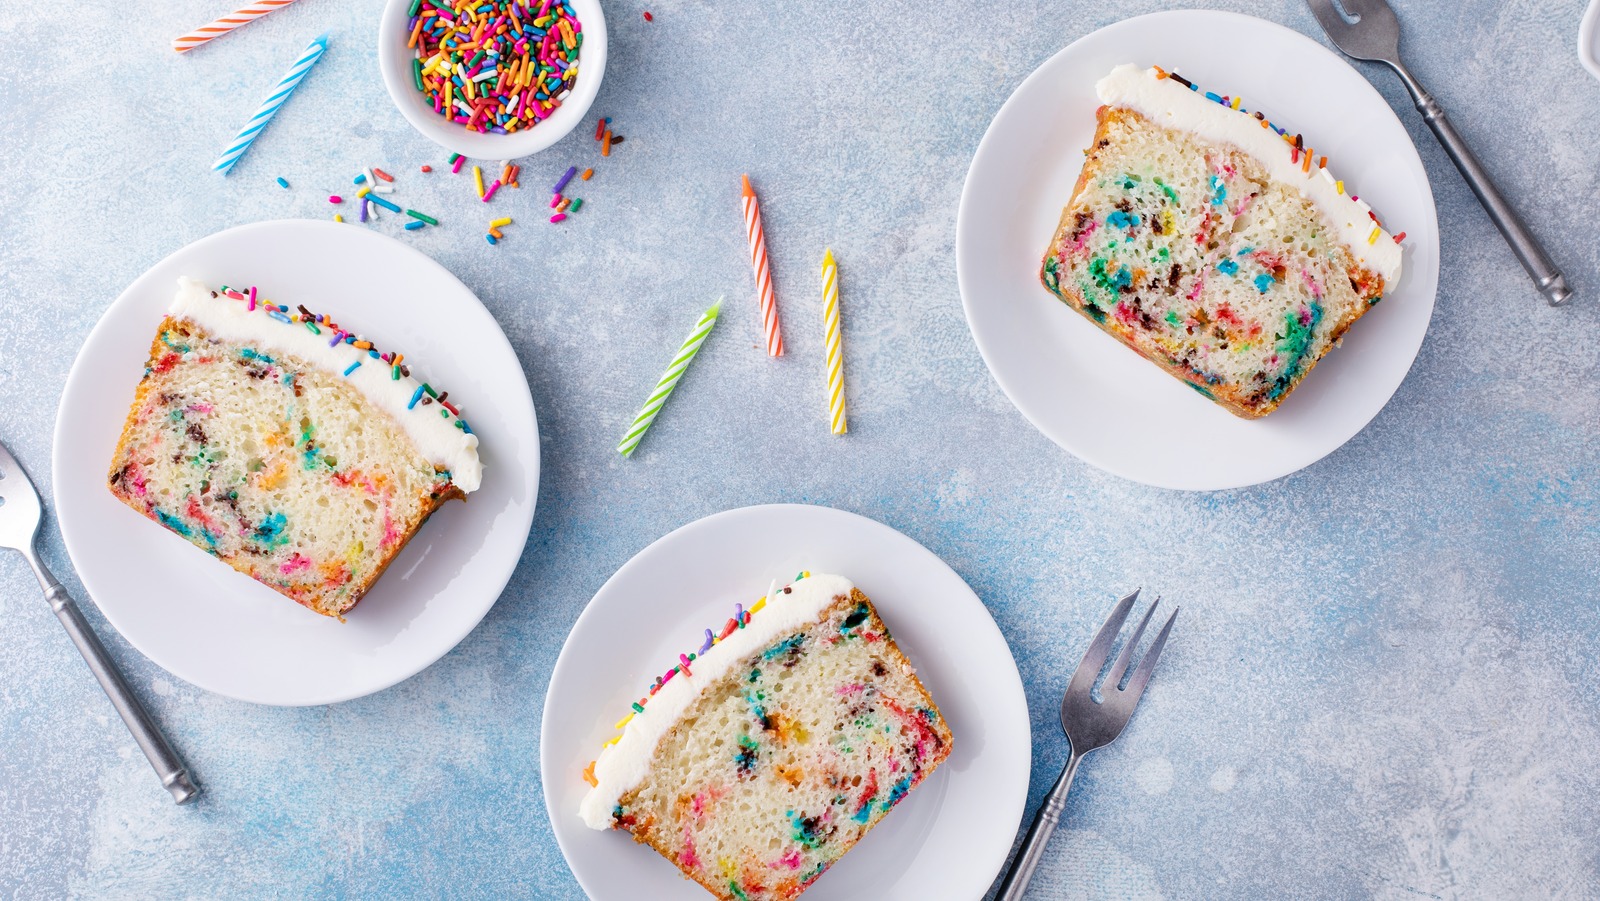 7 Birthday Cake Flavors | Our Baking Blog: Cake, Cookie & Dessert Recipes  by Wilton